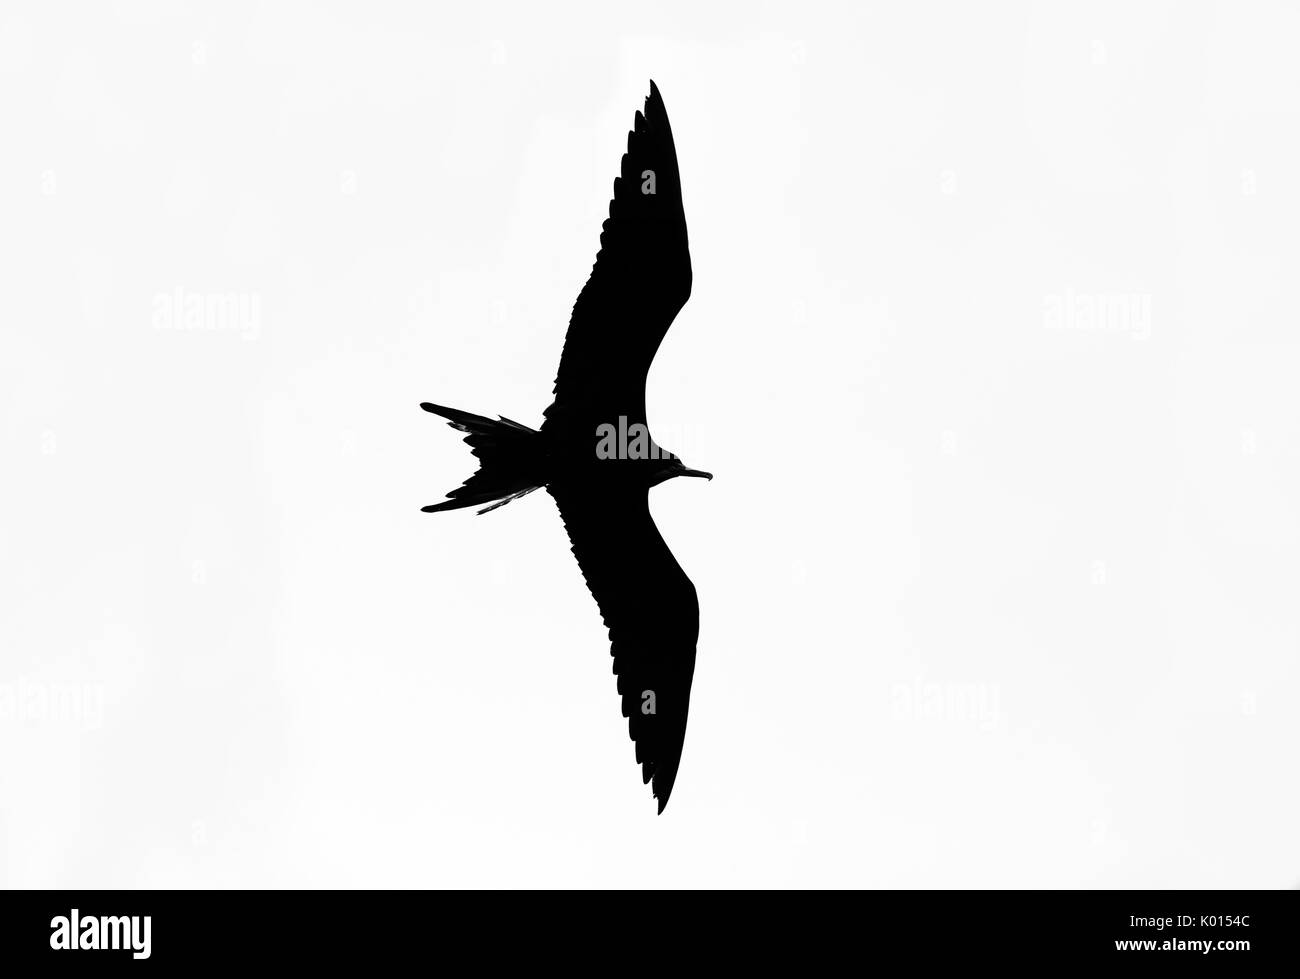 Bird silhouette isolated on white is a detailed feathered bird with both wings out in full flight silhouetted and isolated on a white background. Stock Photo